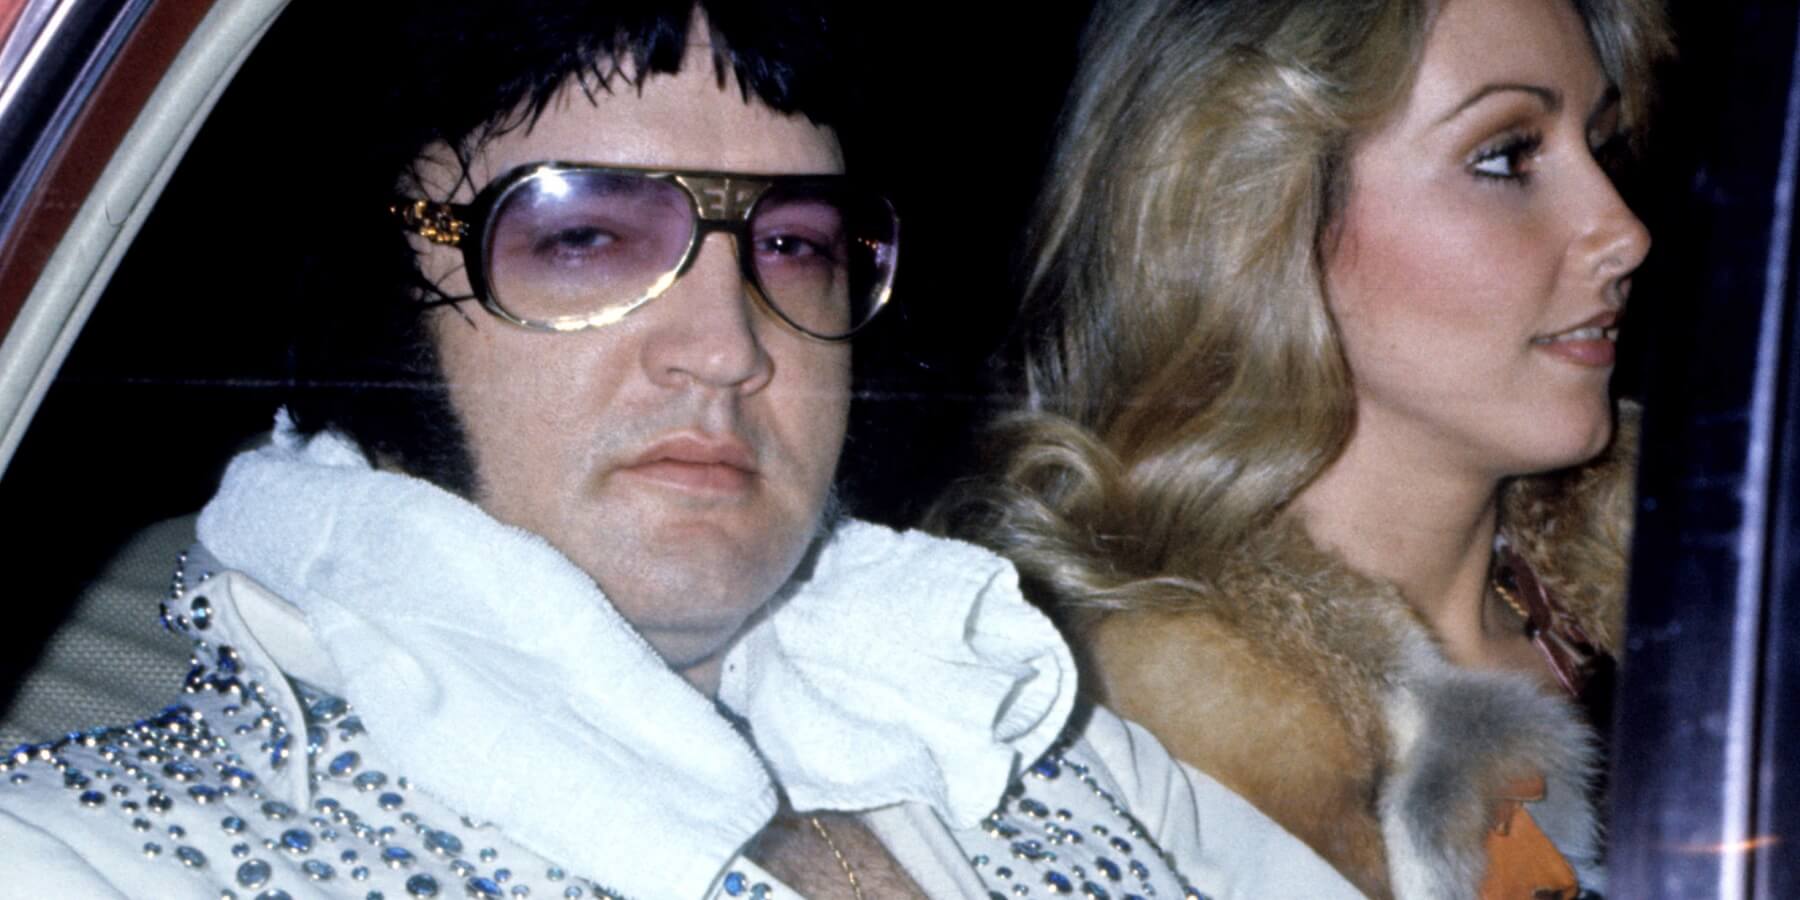 Elvis Presley and Linda Thompson together in a car in a photo taken in 1976.